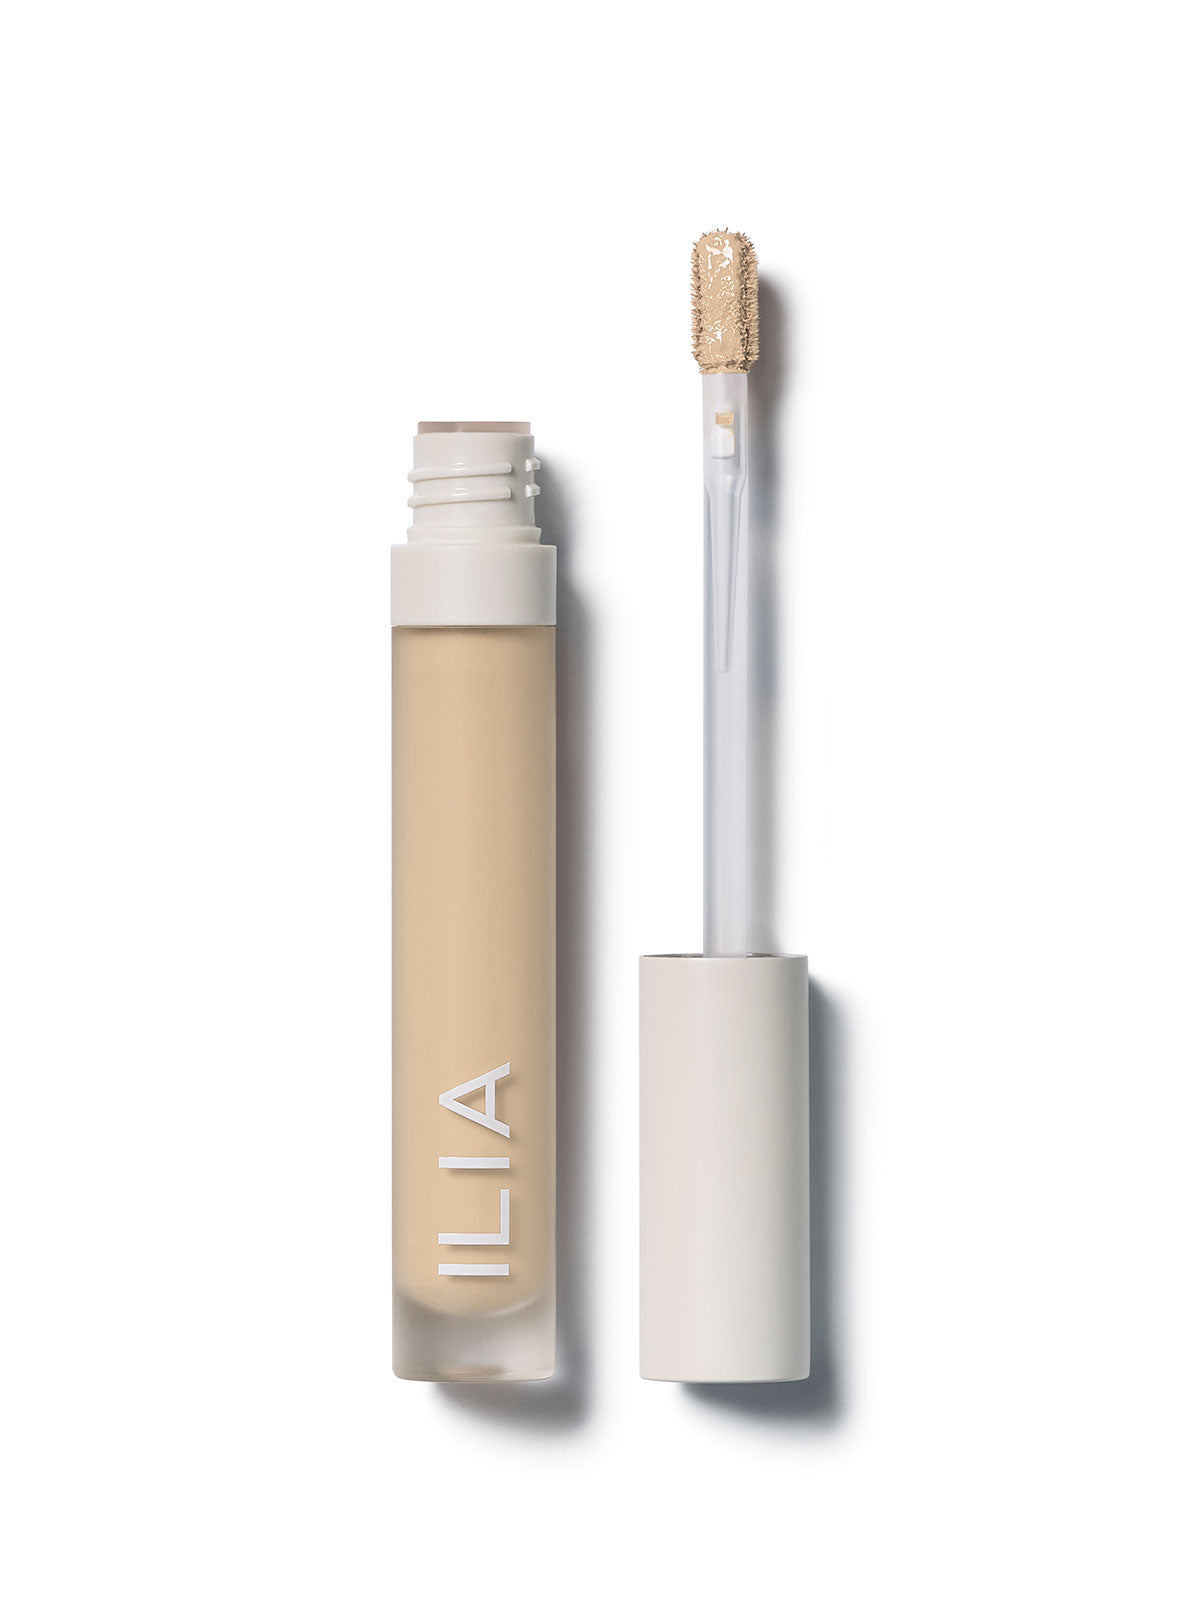 White concealer is a YES for me! Let me know if you want to see a full